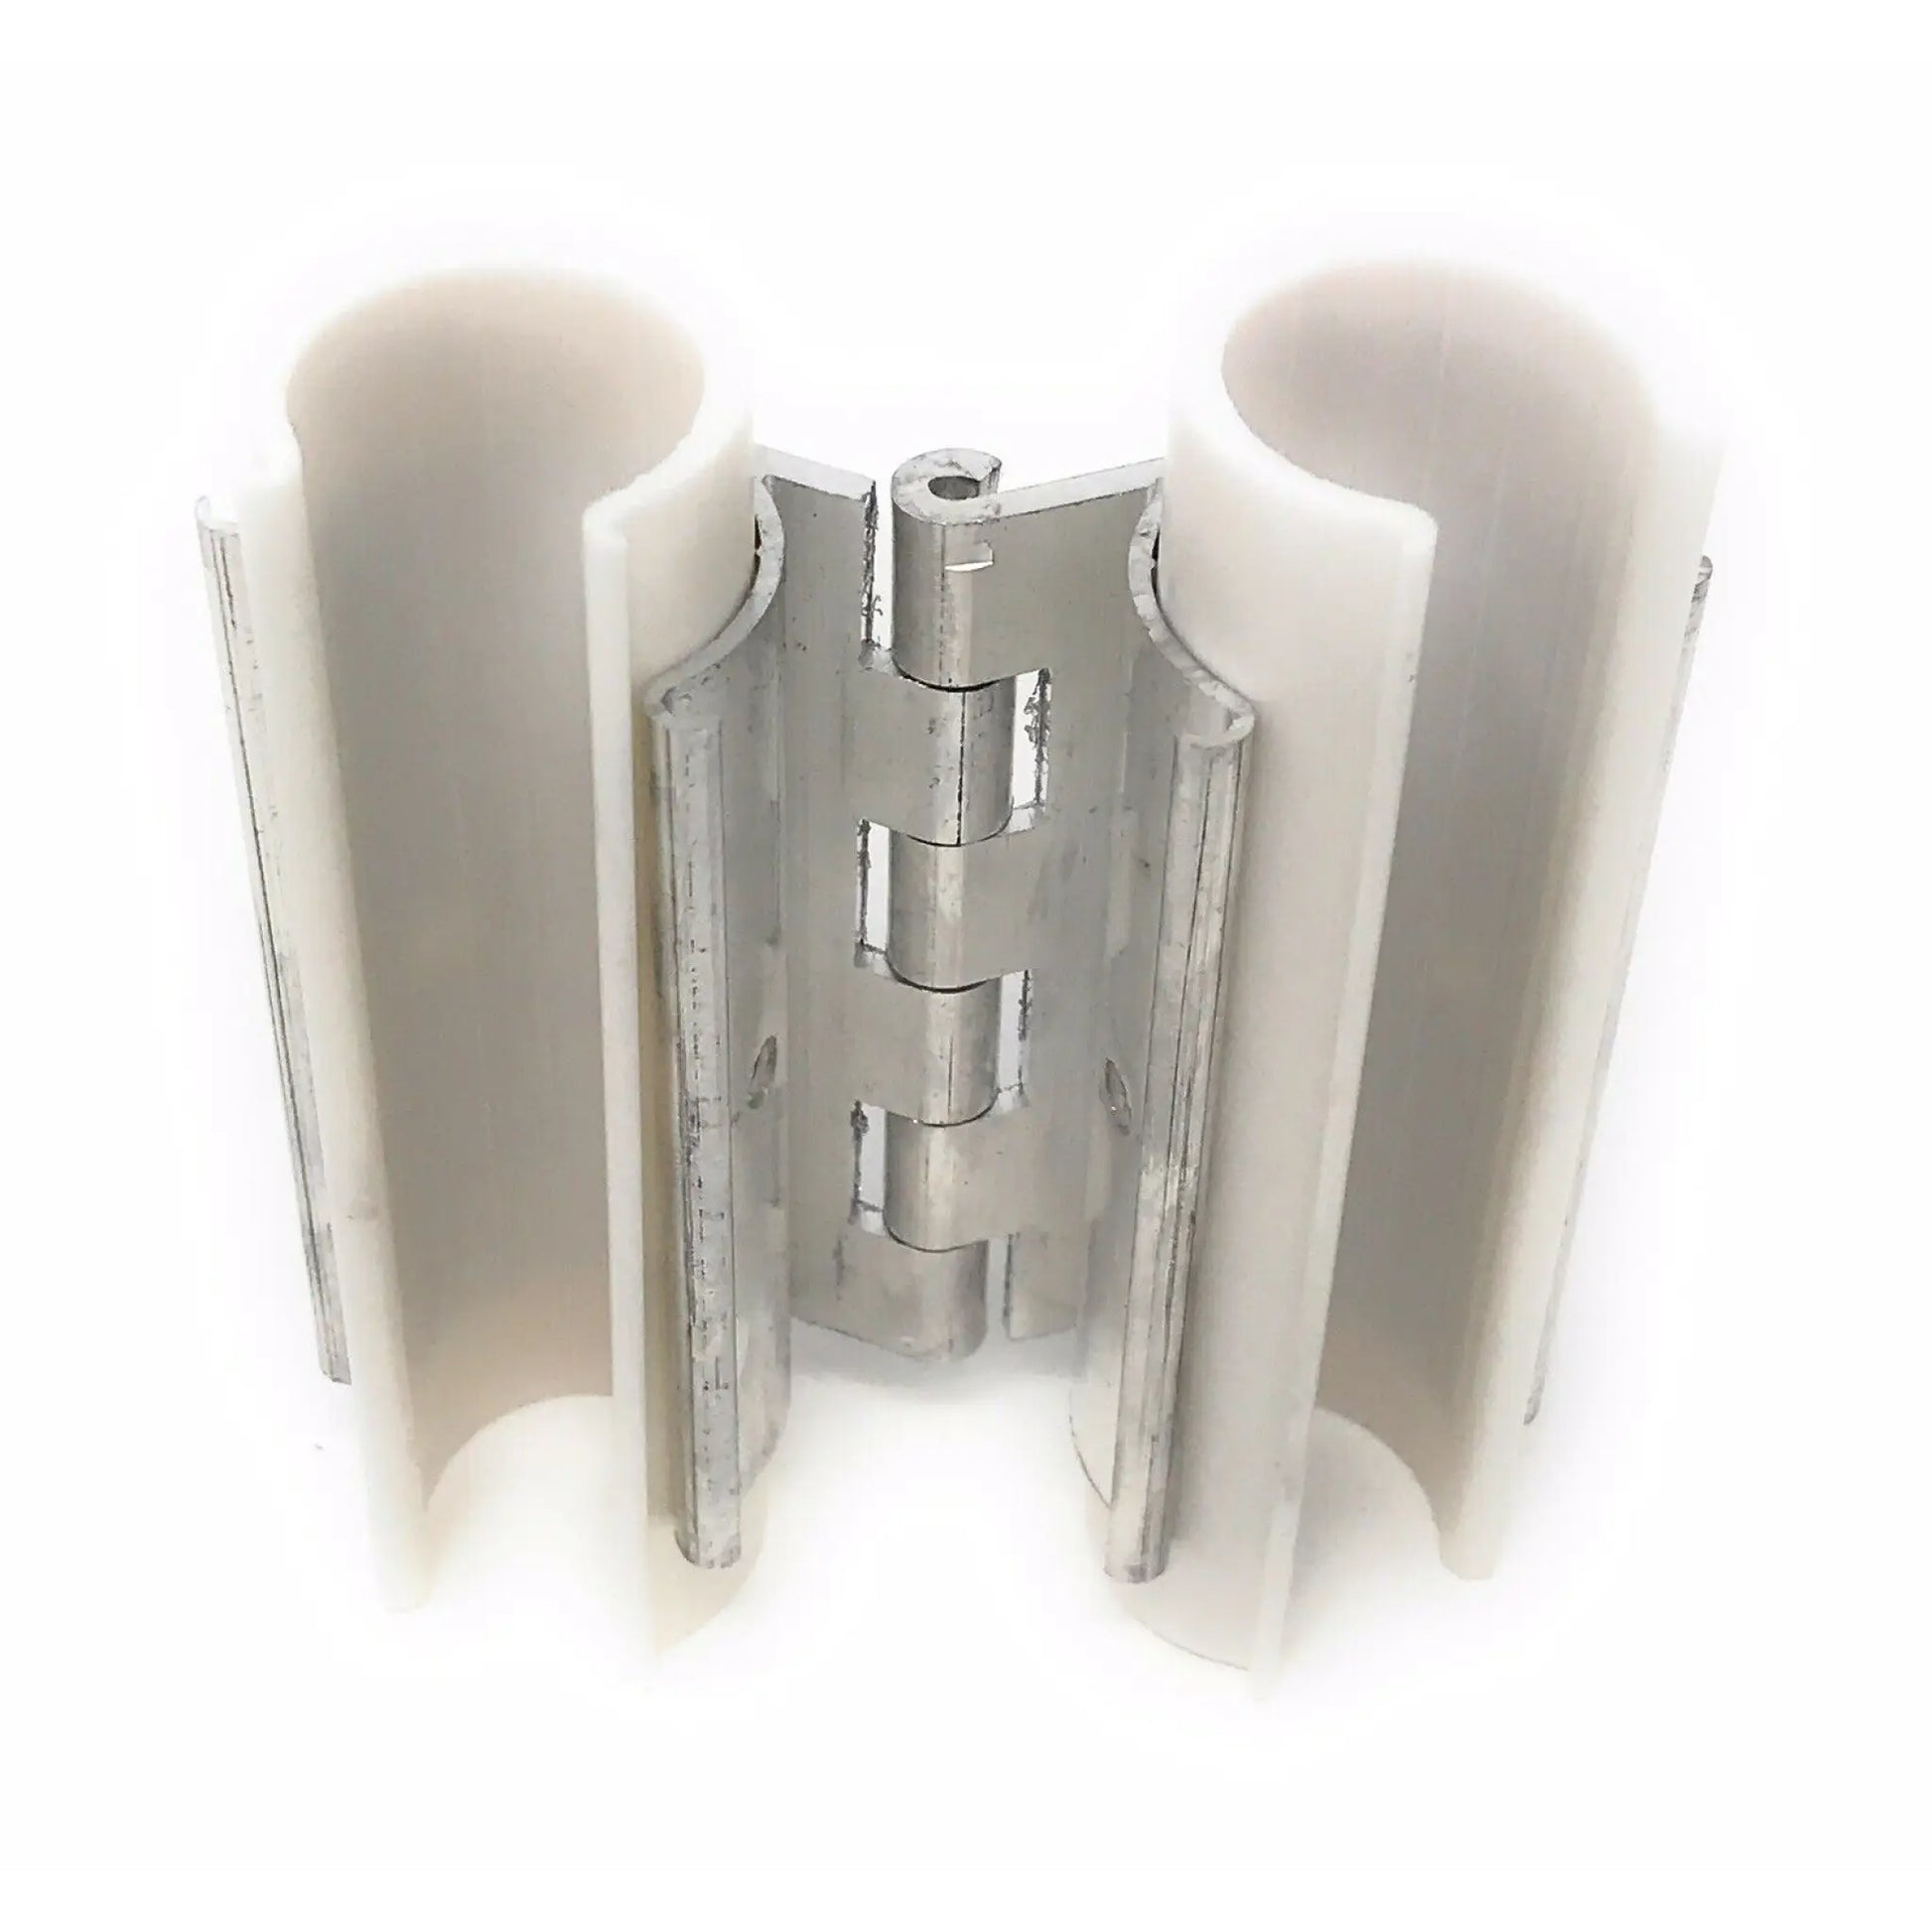 Aluminum Snap on Hinges for EMT pipes - 3/4